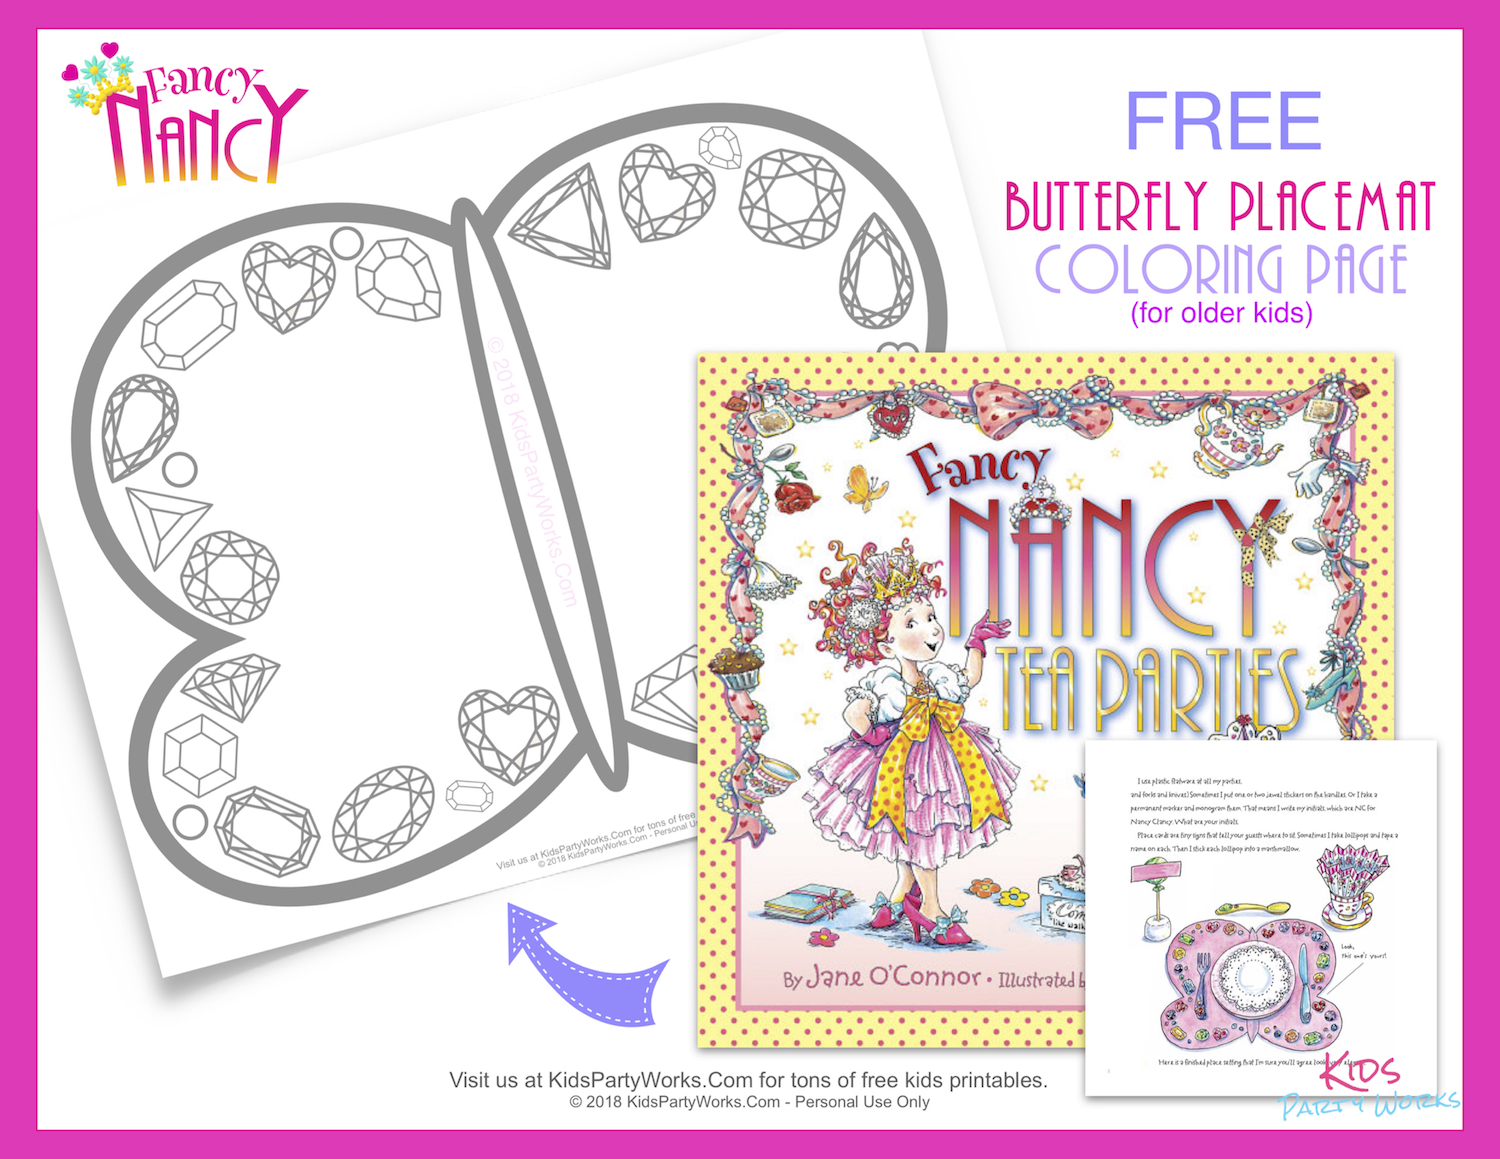 Kids will have fun coloring this Free printable Fancy Nancy Tea Parties butterfly placemat with beautiful gems, just like in the book.